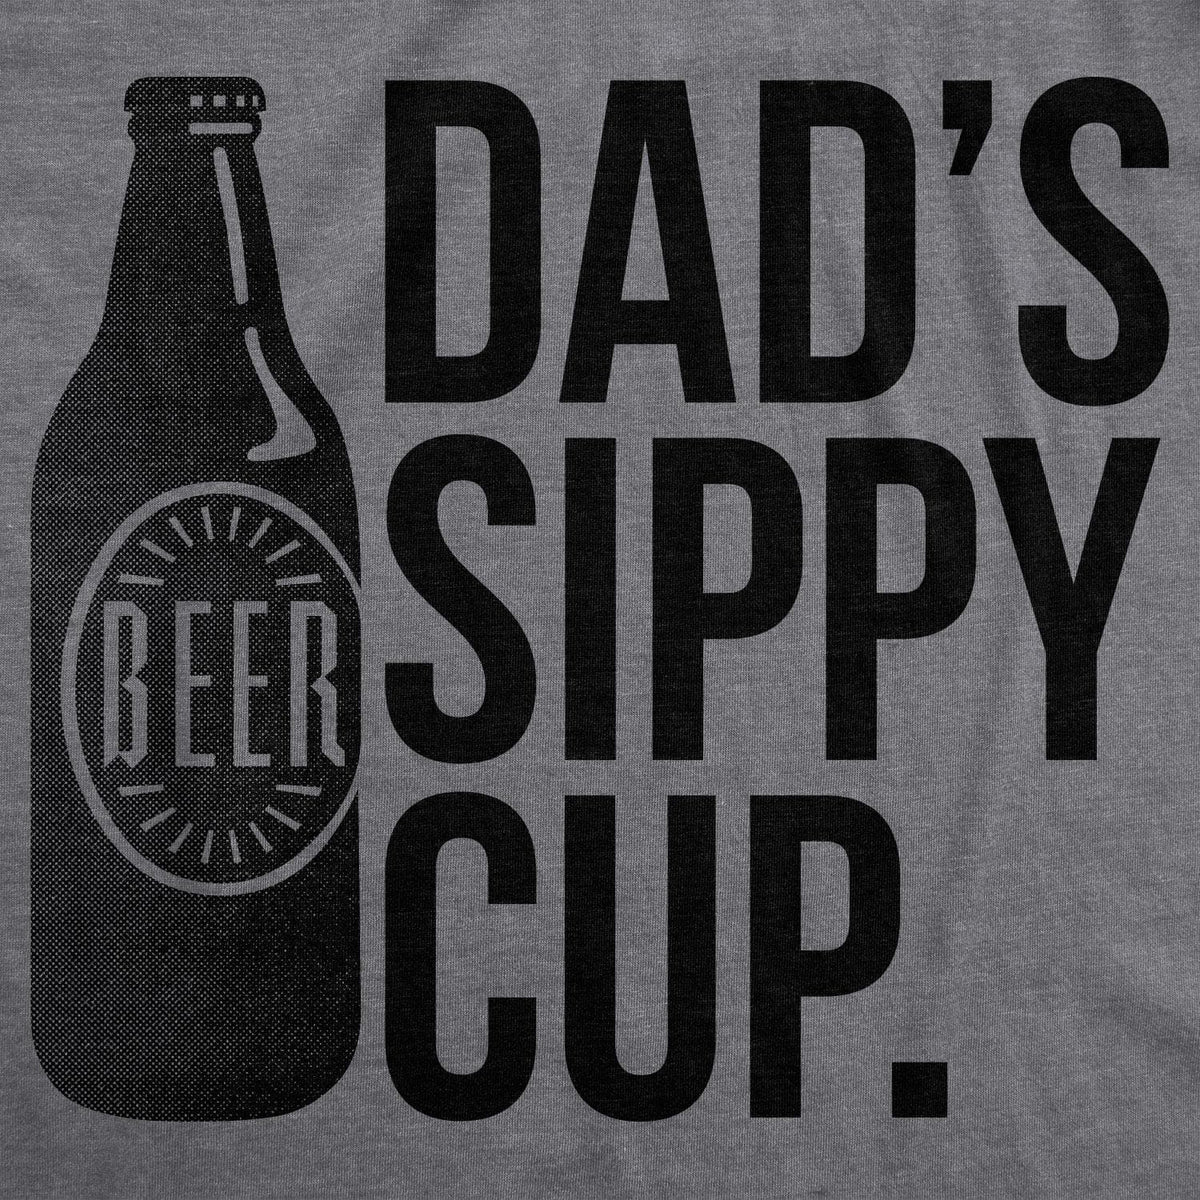 Beer Sippy Cup